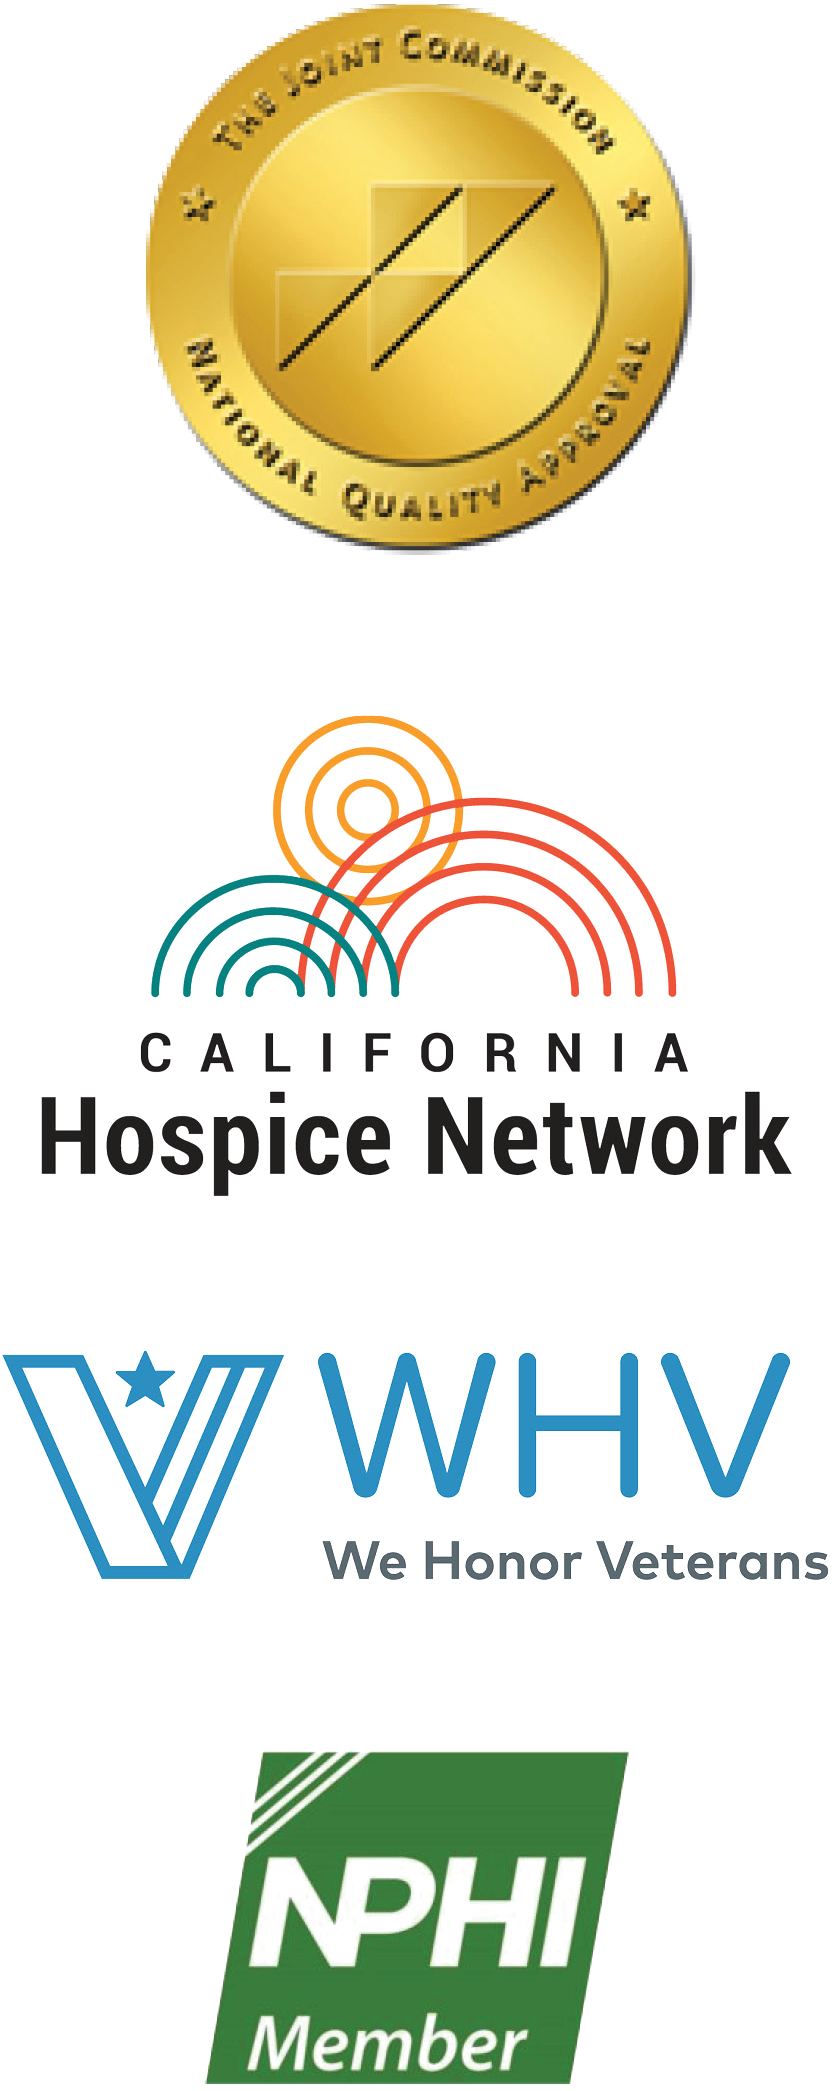 Joint Commission Accredited, Founding member California Hospice Network